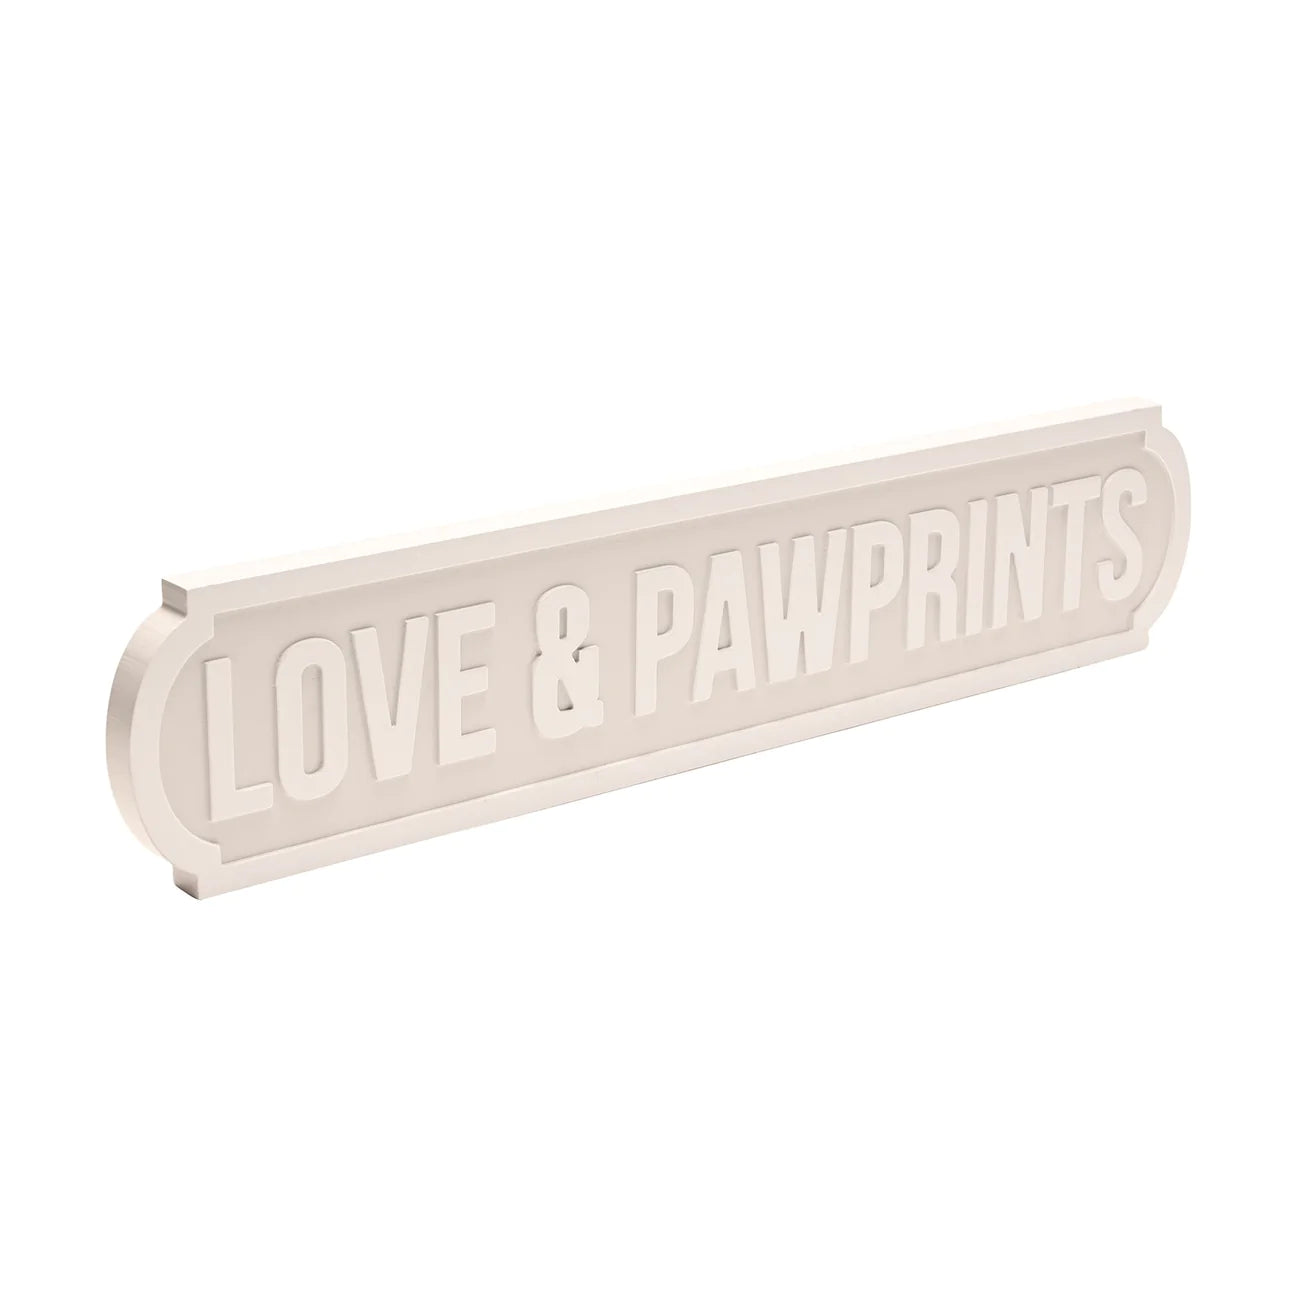 Love & Pawprints or Live Laugh Woof